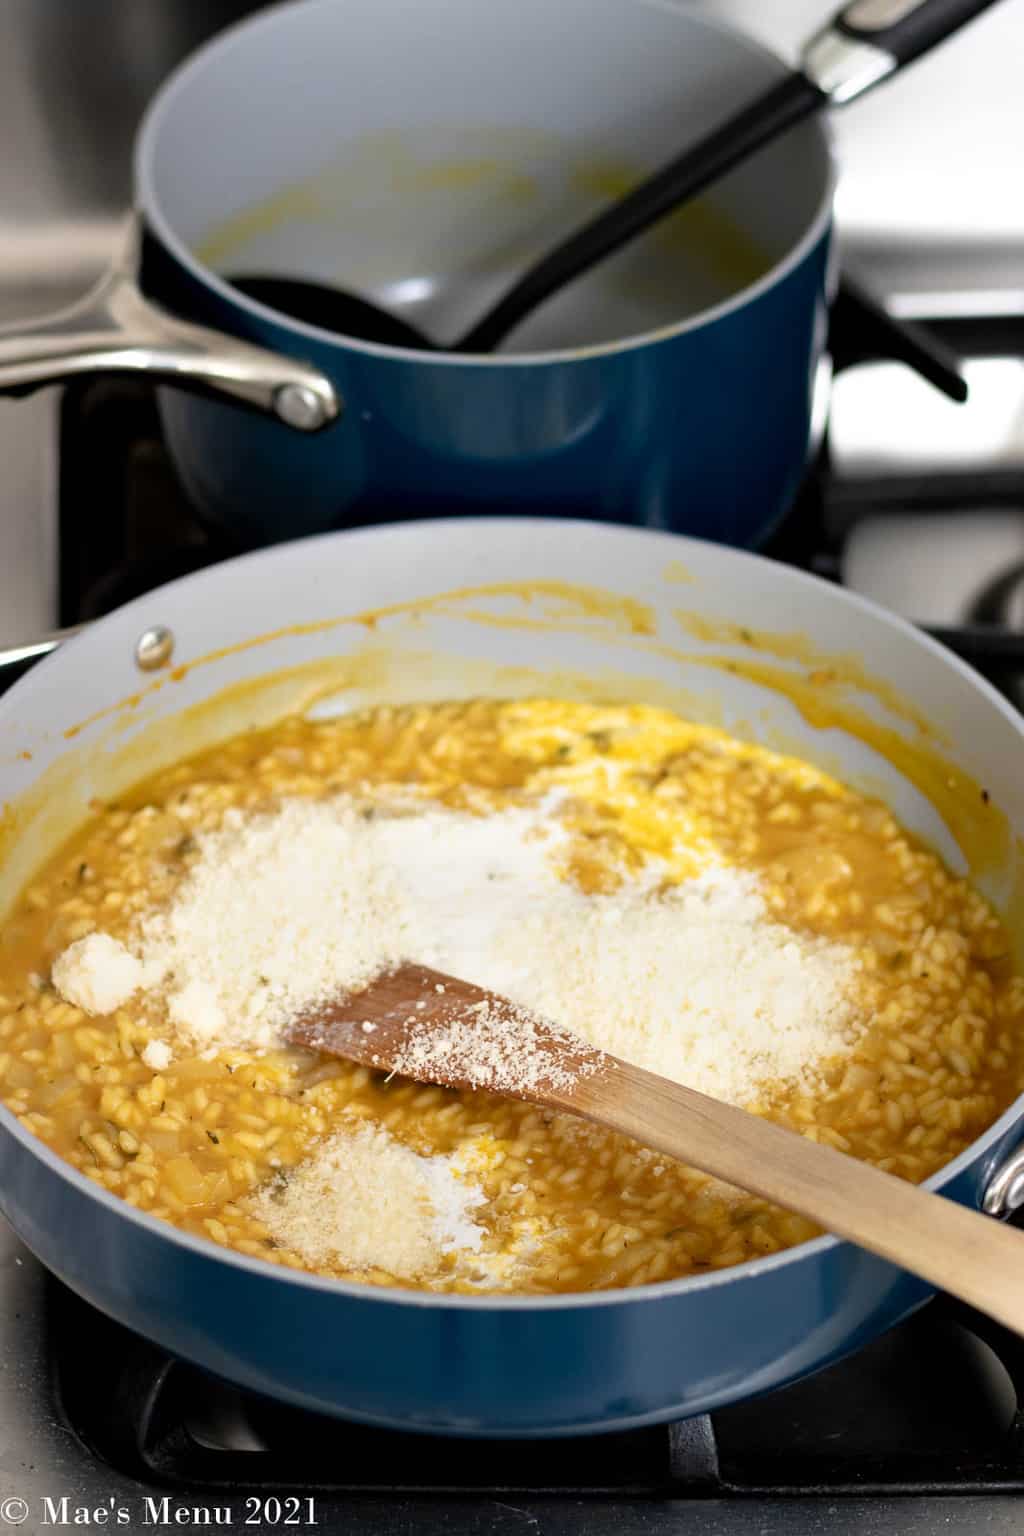 Stirring half and half and parmesan cheese into the pumpkin risotto